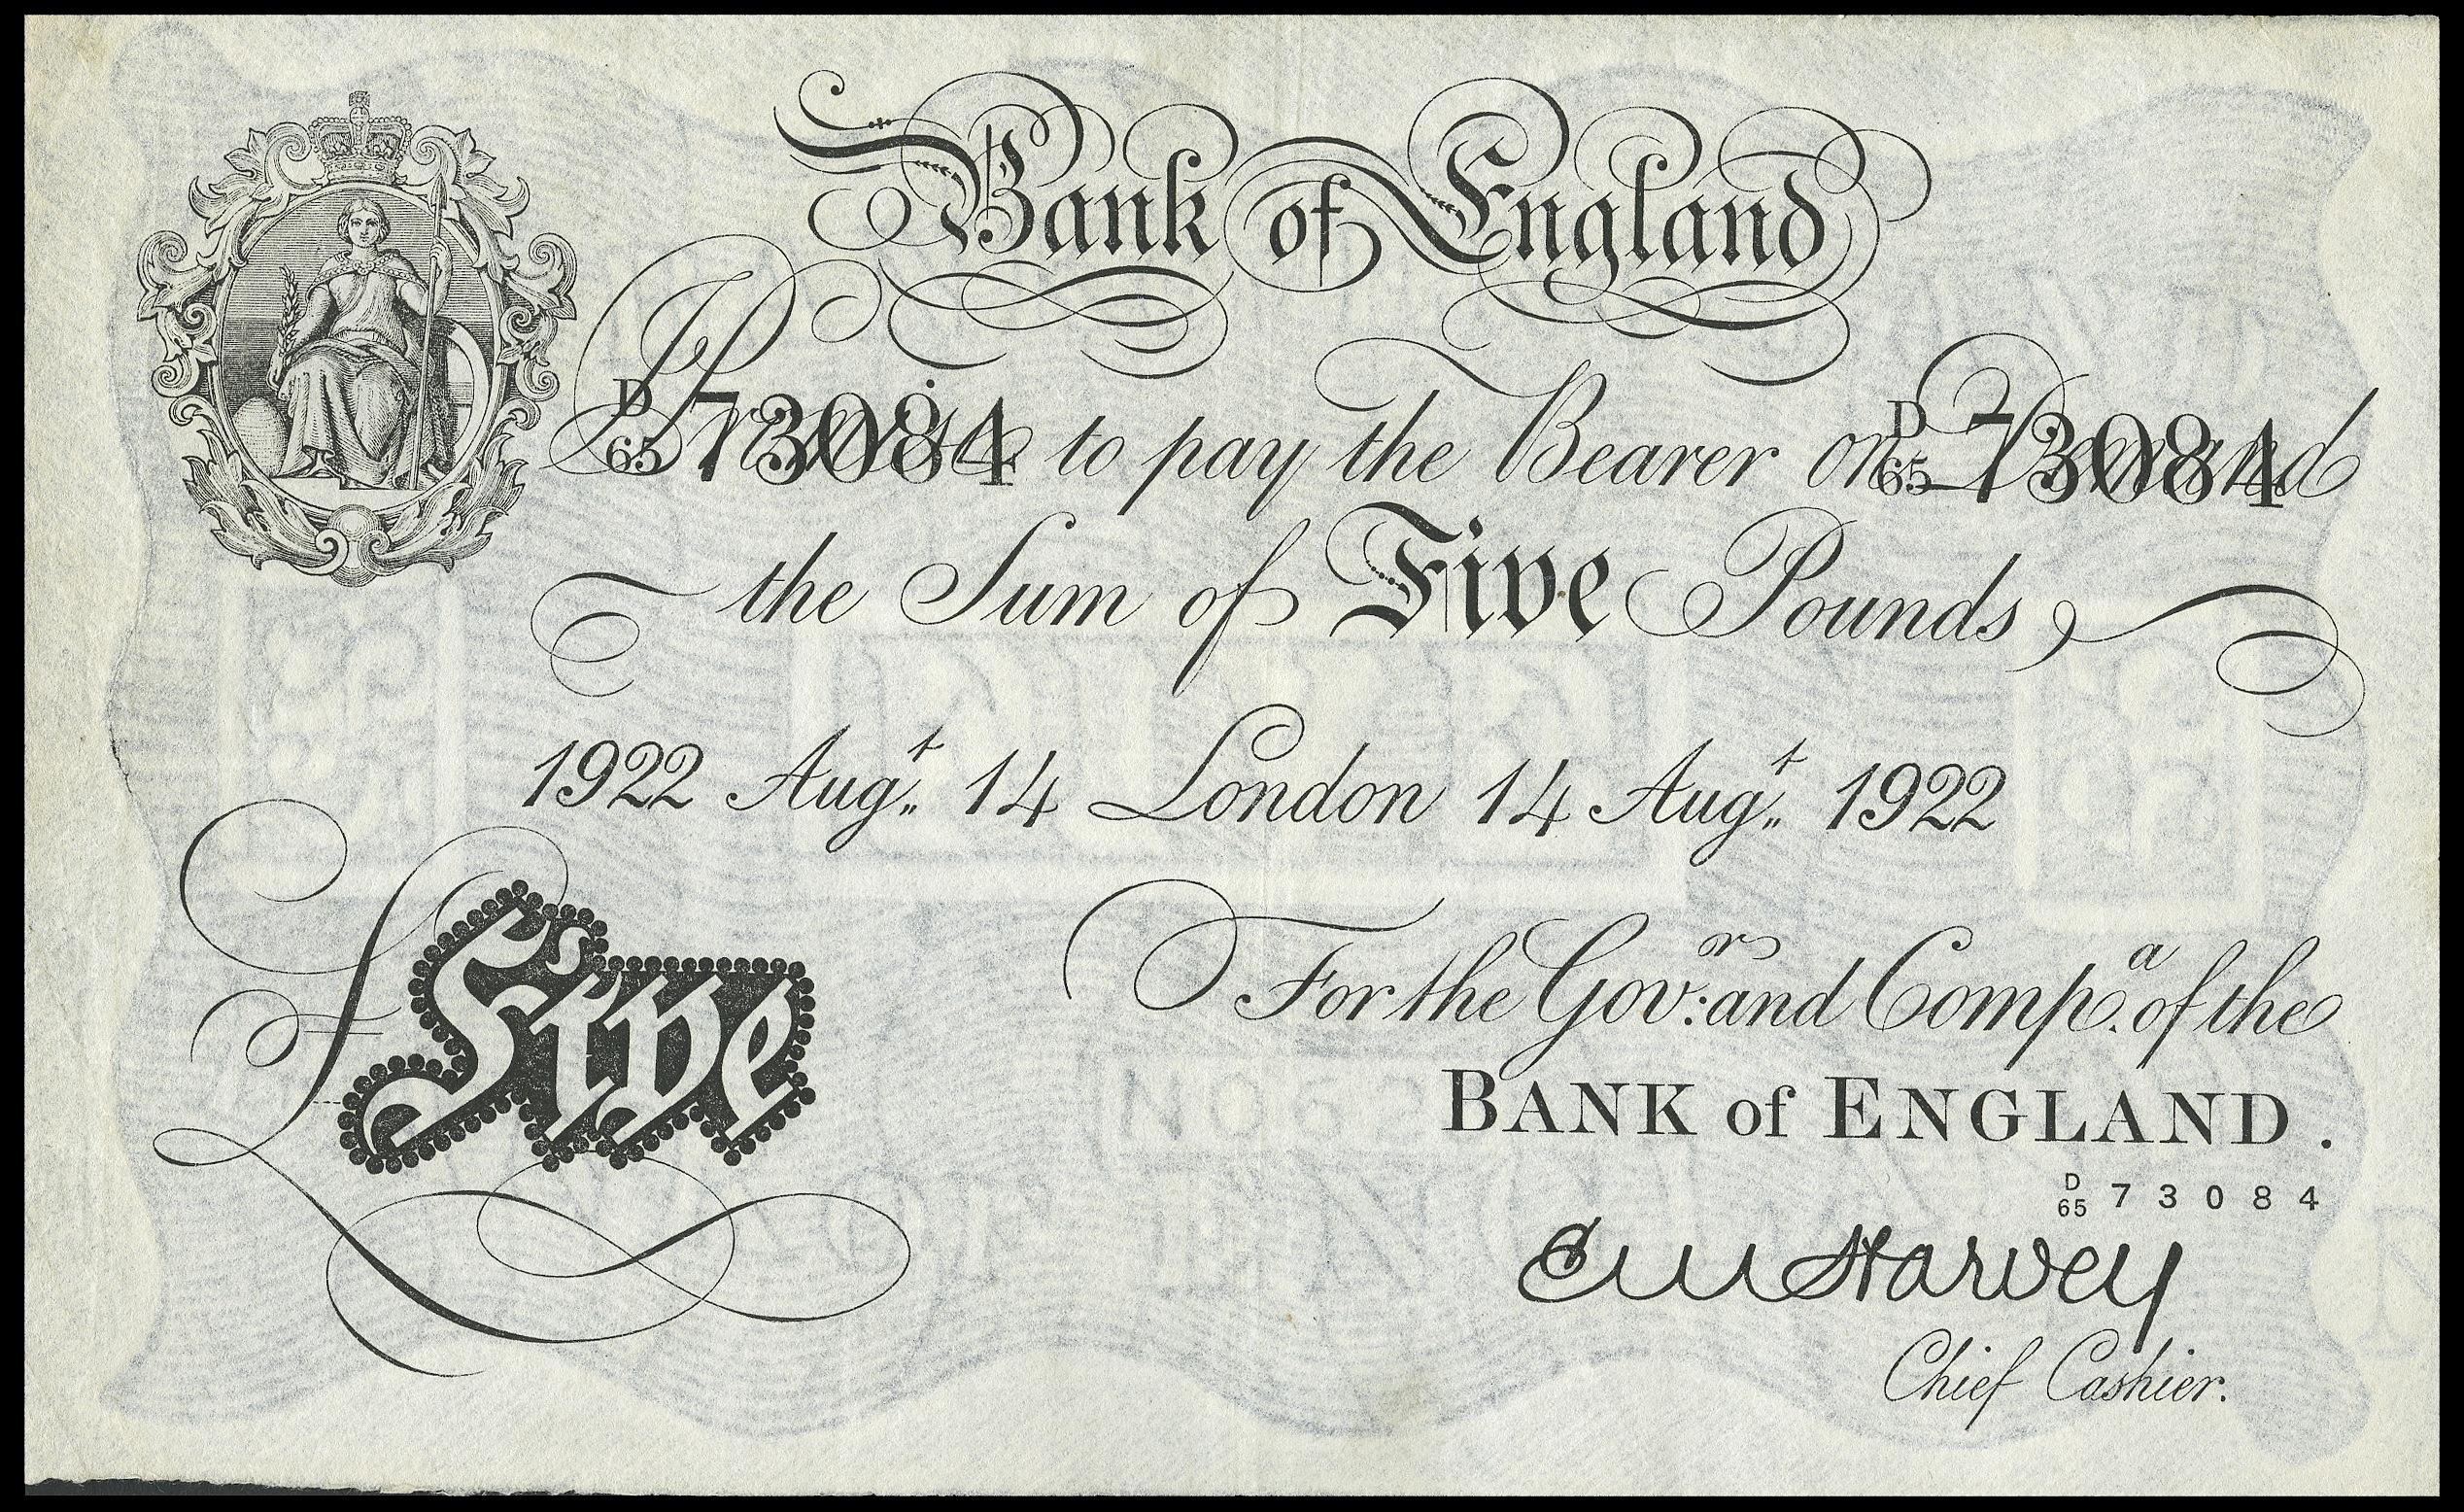 BRITISH BANKNOTES, Bank of England, E.M. Harvey, Five Pounds, 14 August 1922, D/65 73084 (Dugg.